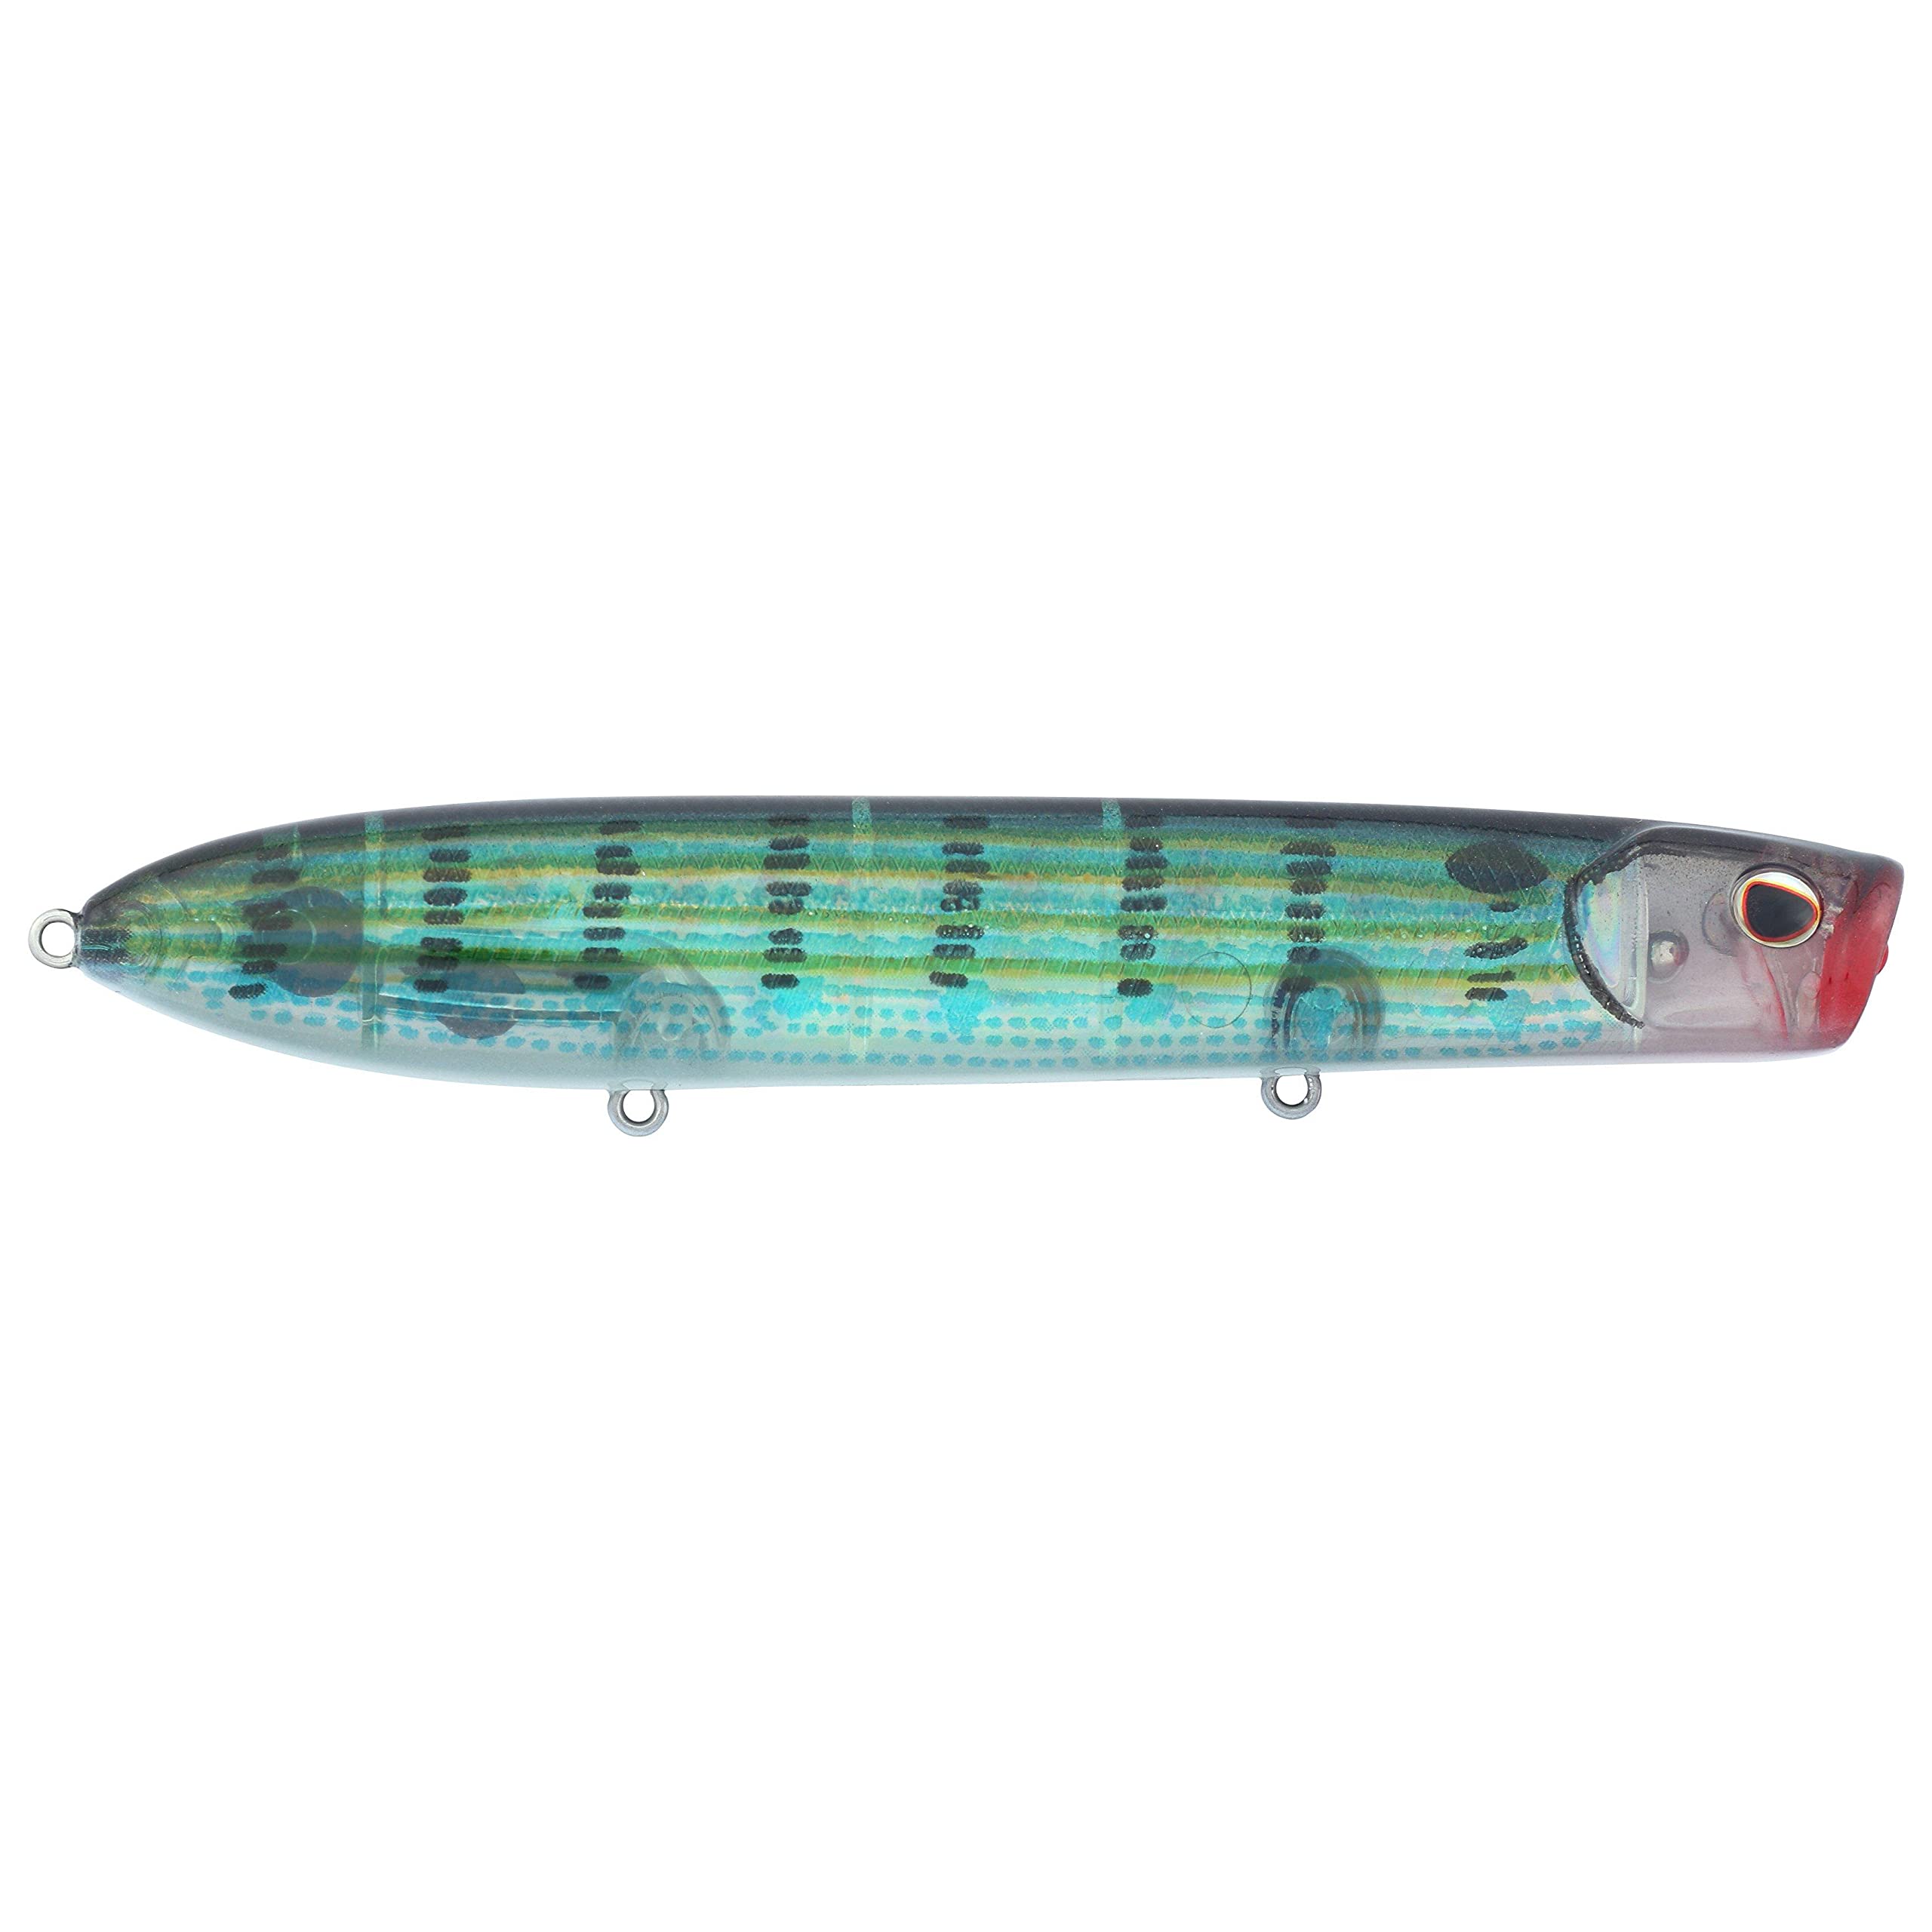 Berkley Cane Walker Topwater Fishing Lure, Pinfish, 4/5 oz, 125mm Topwater, Heavy Tail Weight for Long-Distance Casting, Equipped with Fusion19 Hook